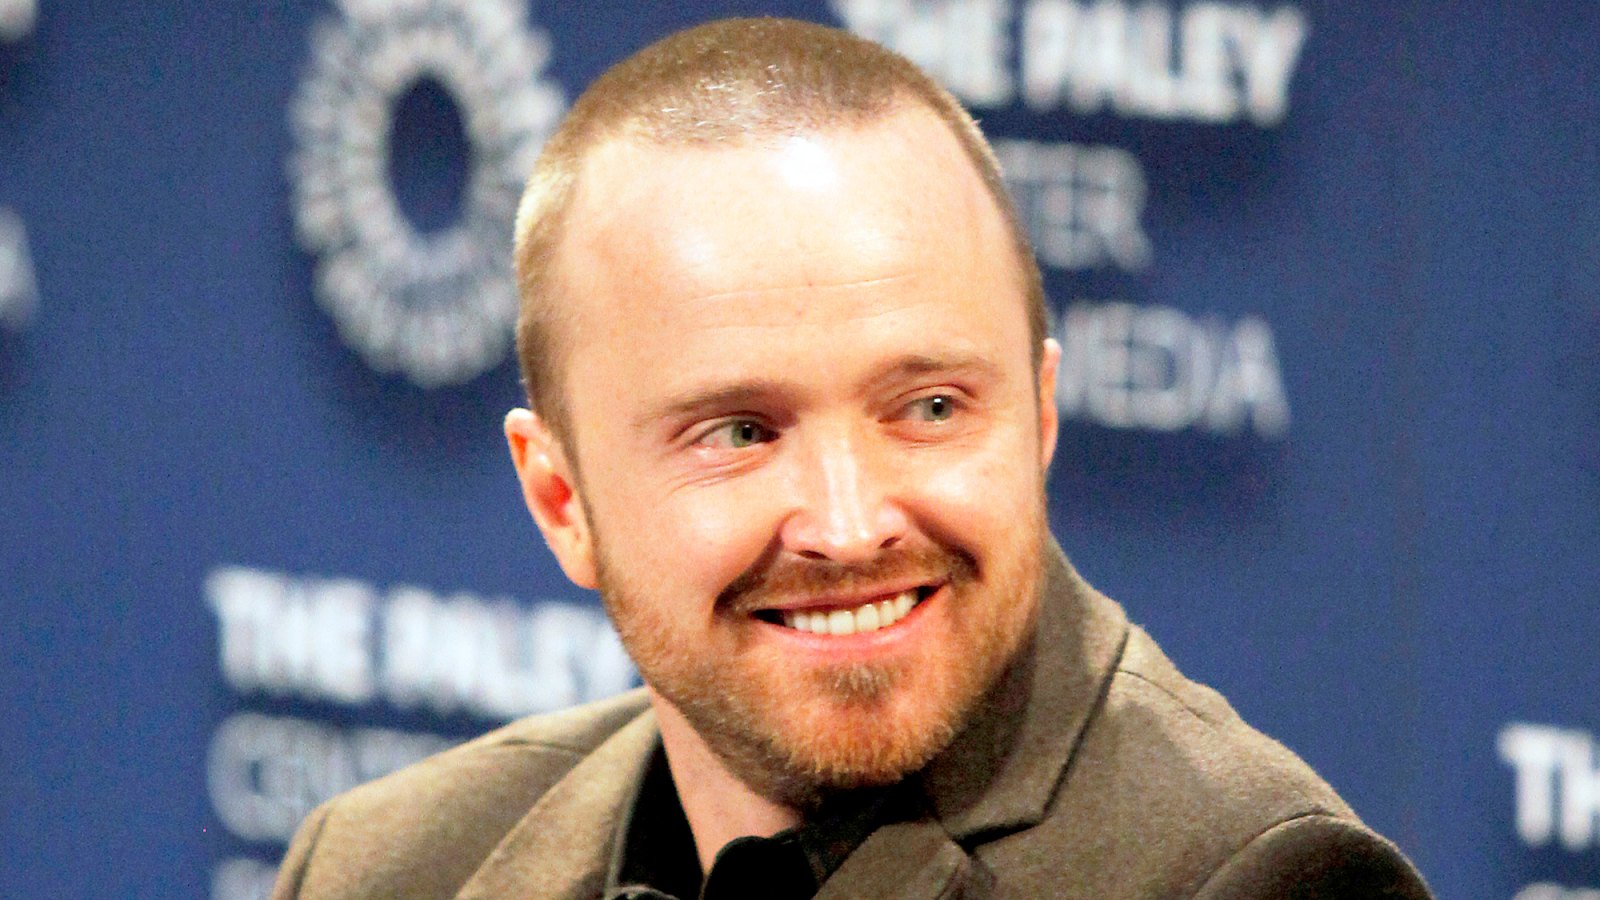 Aaron Paul attends the Paley Center for Media's presentation of Hulu's 'The Path' Season 3 premiere Q&A at The Paley Center for Media on December 21, 2017 in Beverly Hills, California.